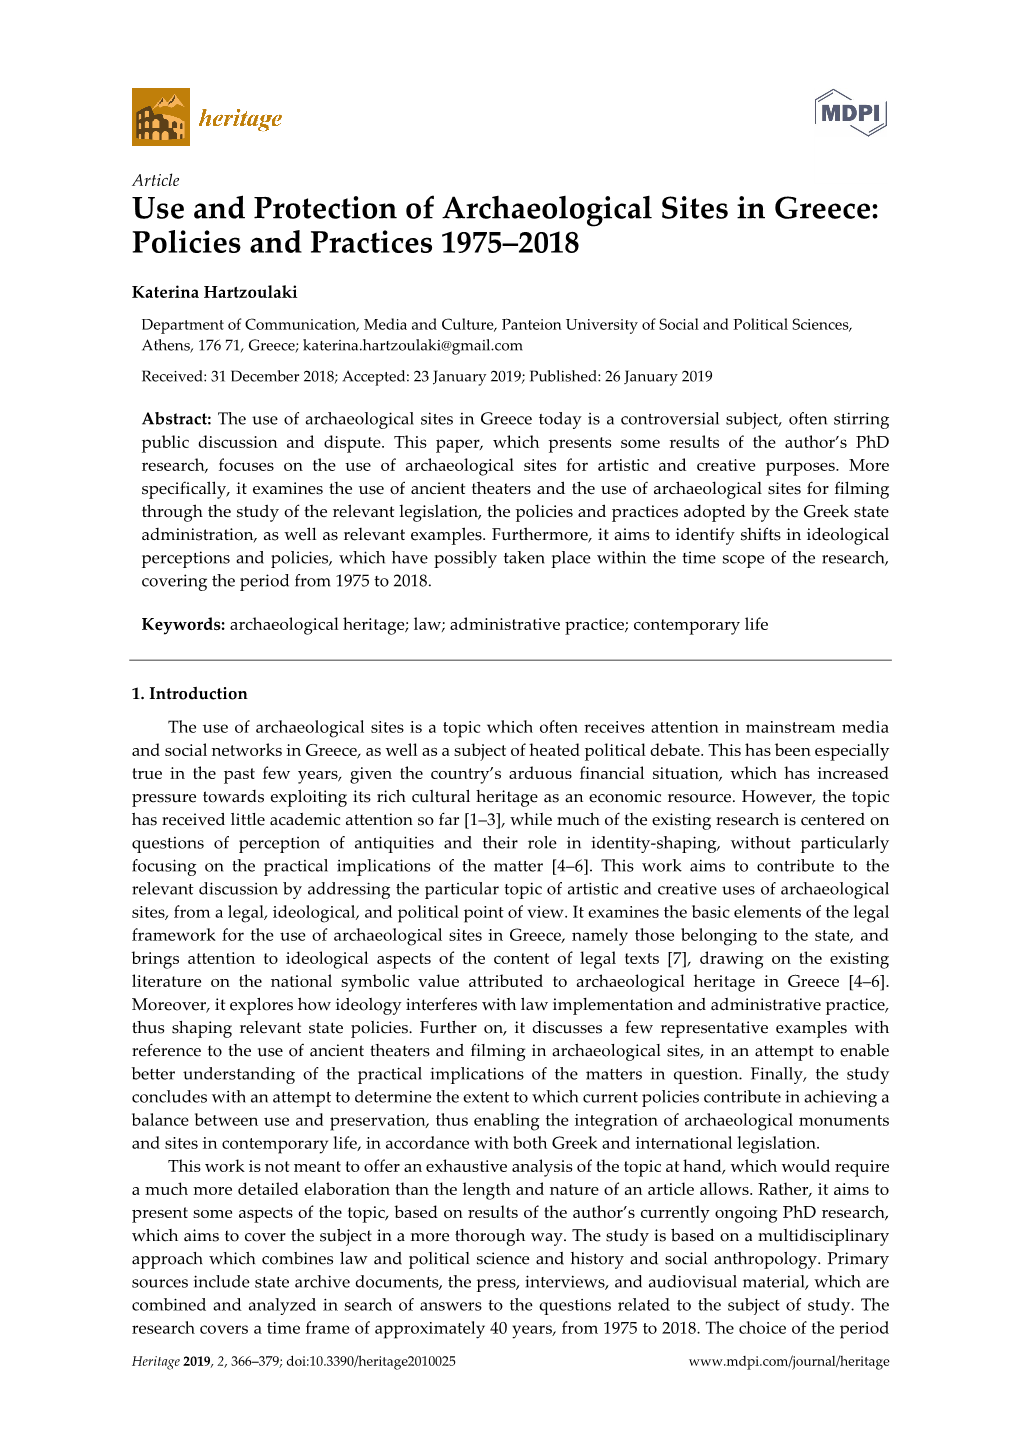 Use and Protection of Archaeological Sites in Greece: Policies and Practices 1975–2018